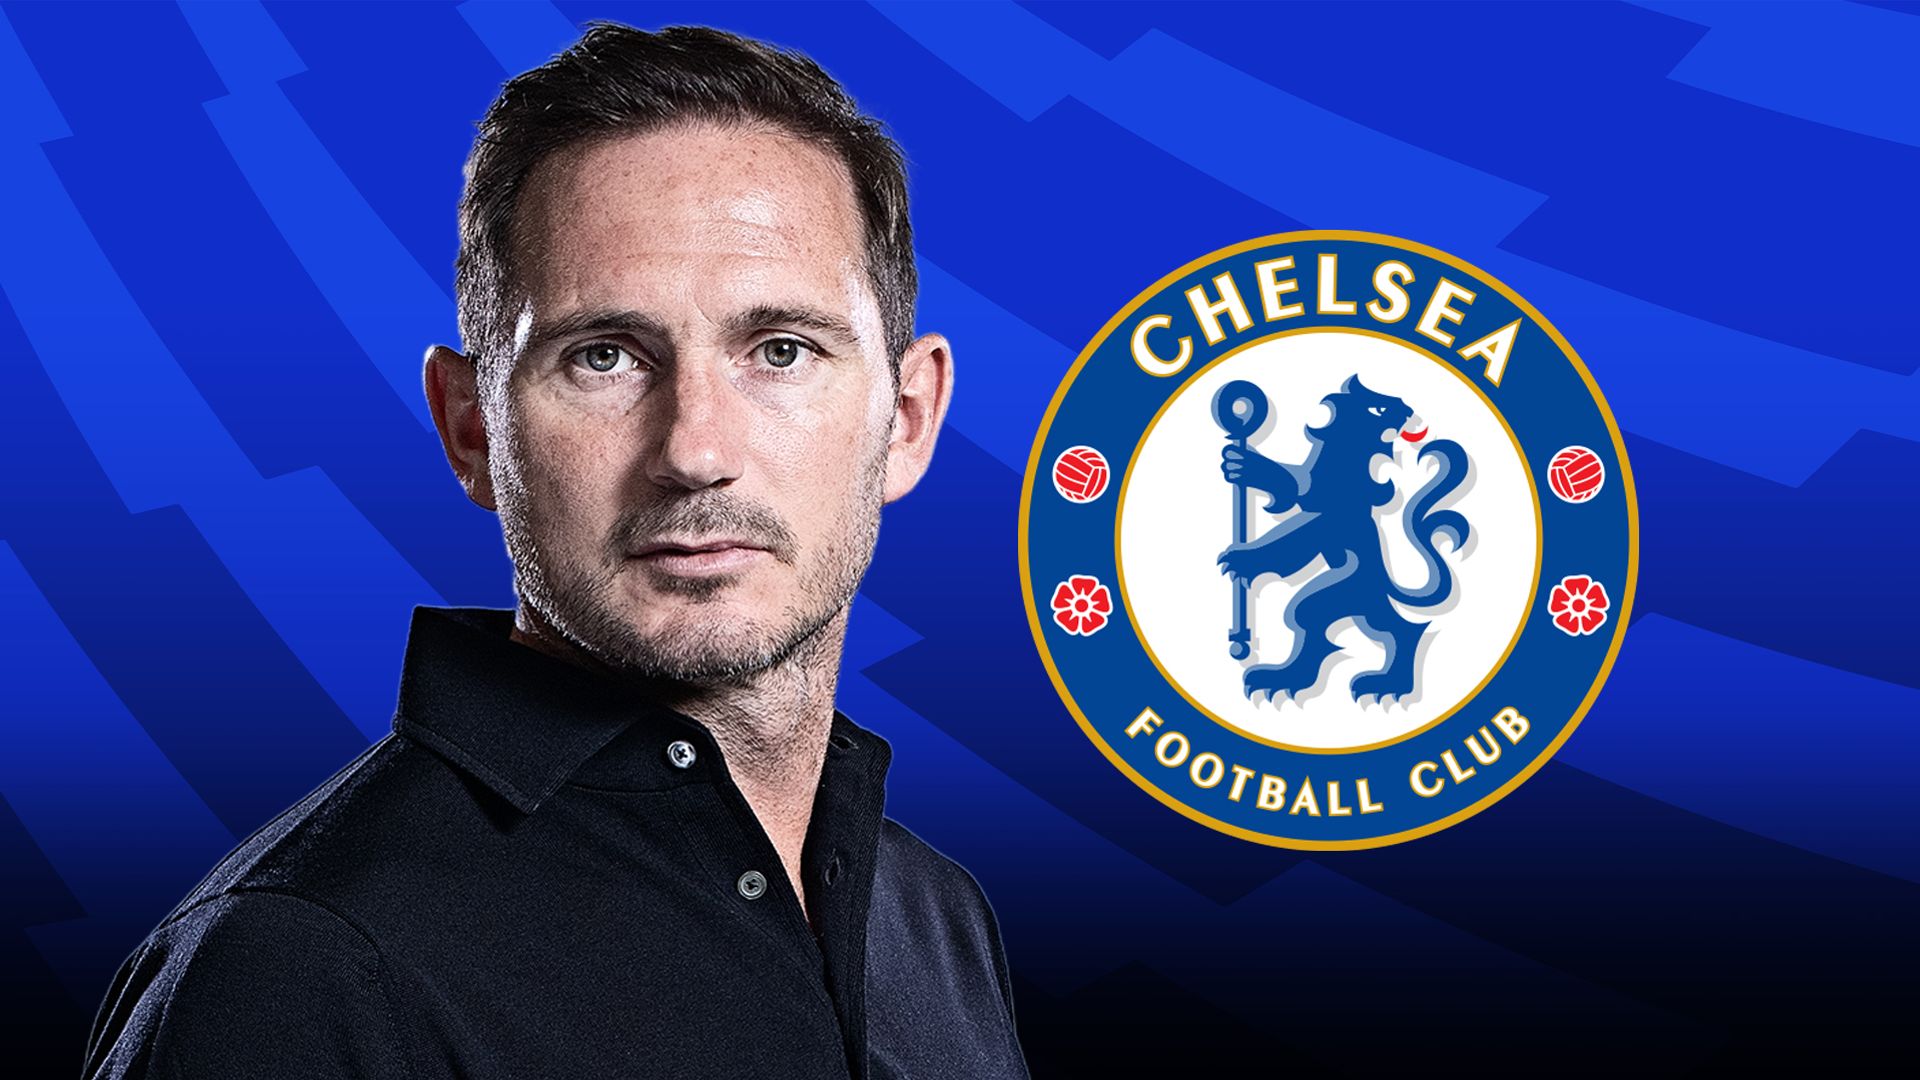 Chelsea to appoint Lampard as caretaker manager